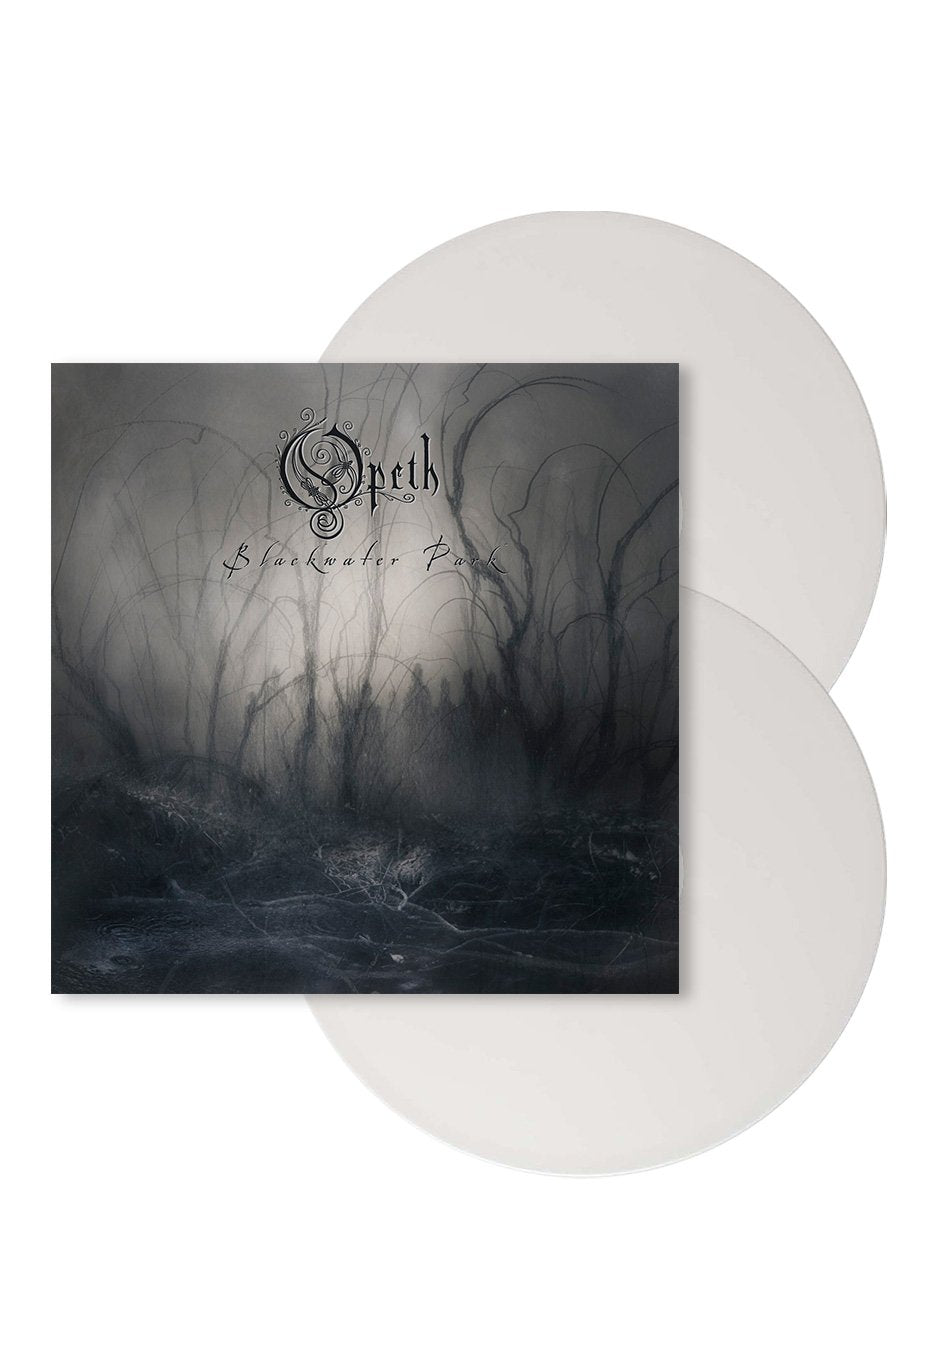 Opeth - Blackwater Park (20th Anniversary Edition) White - Colored 2 Vinyl